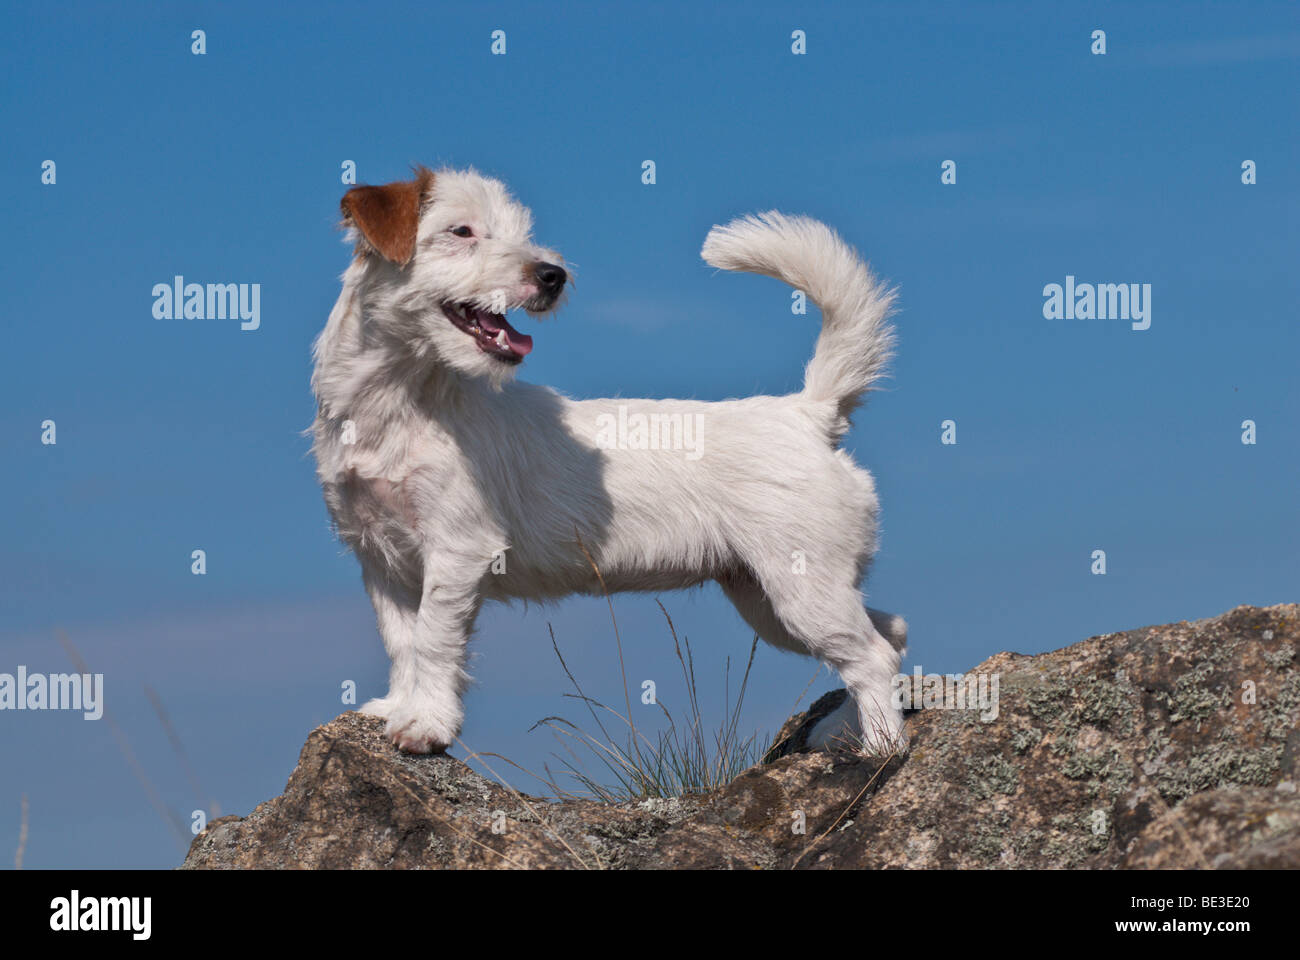 Jack Russell Terrier standing on rocks Stock Photo